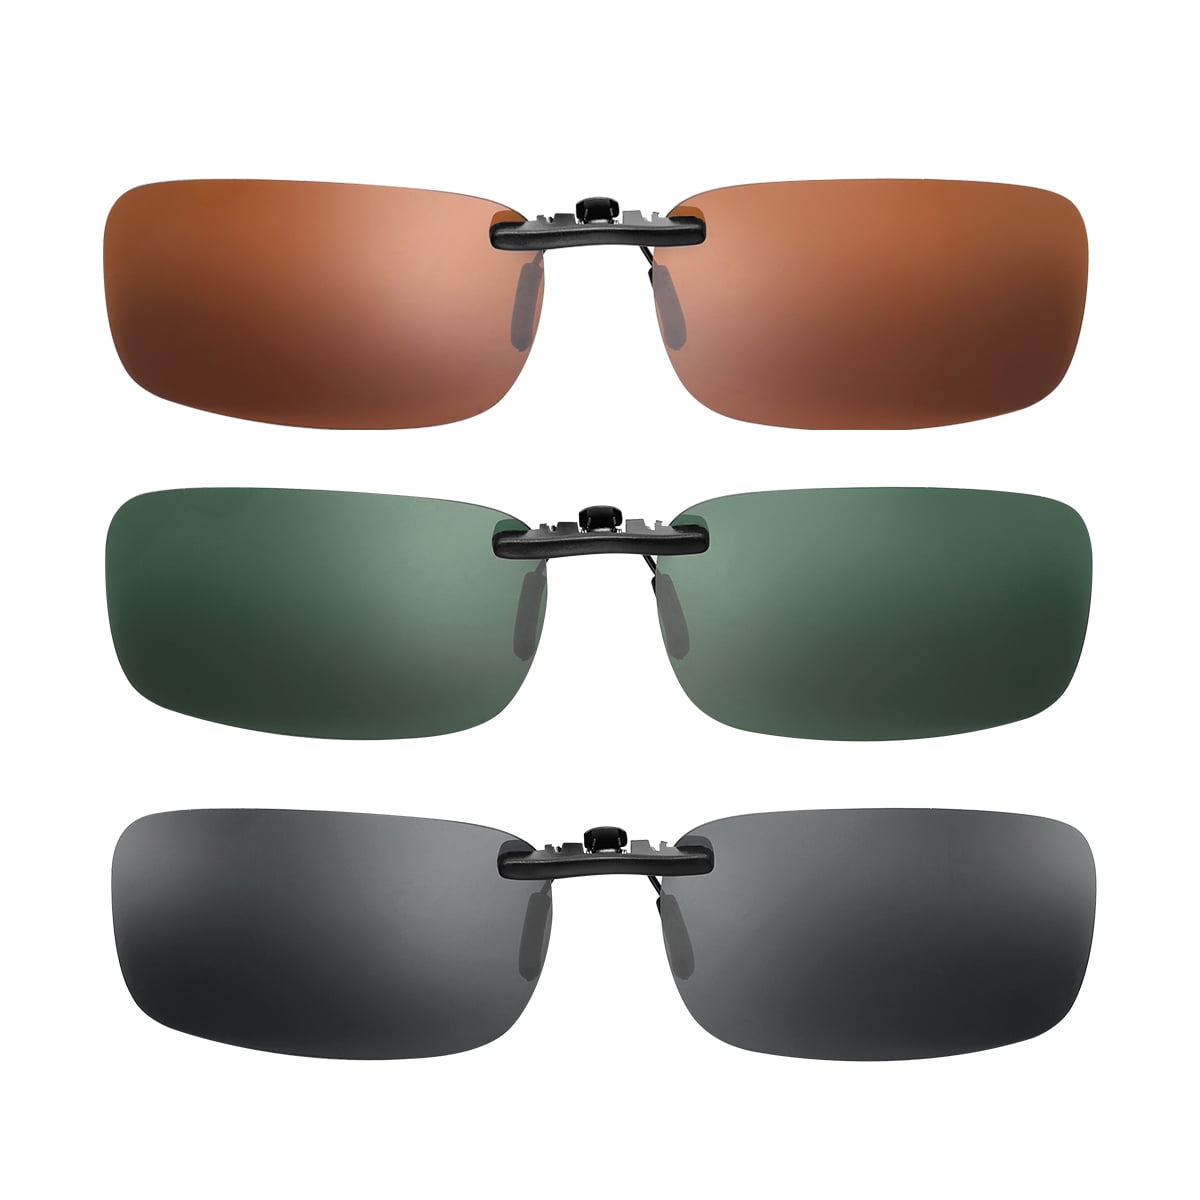 Polarized Wooden Sunglasses For Men & Women Featuring 10 & 11 LAYERED Lens